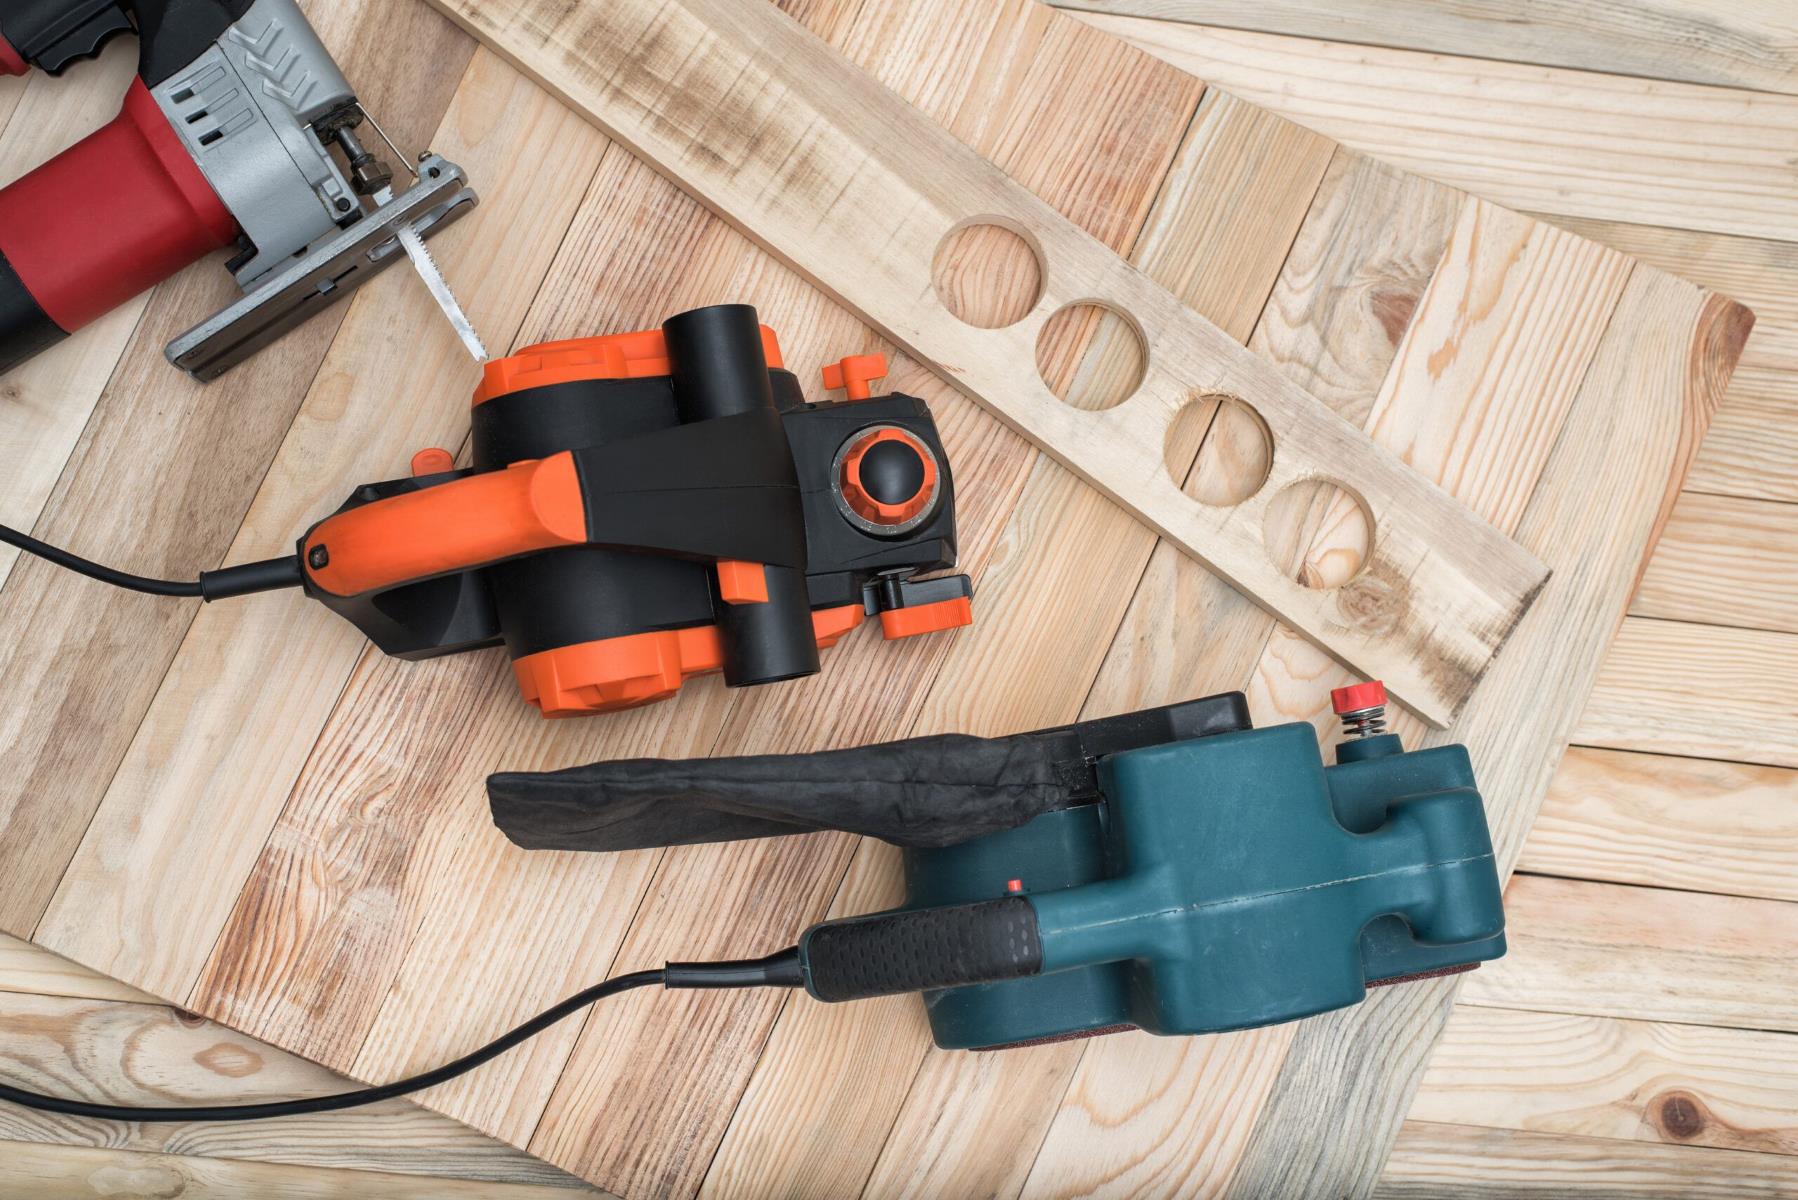 What Power Tools Are Needed For Home Projects